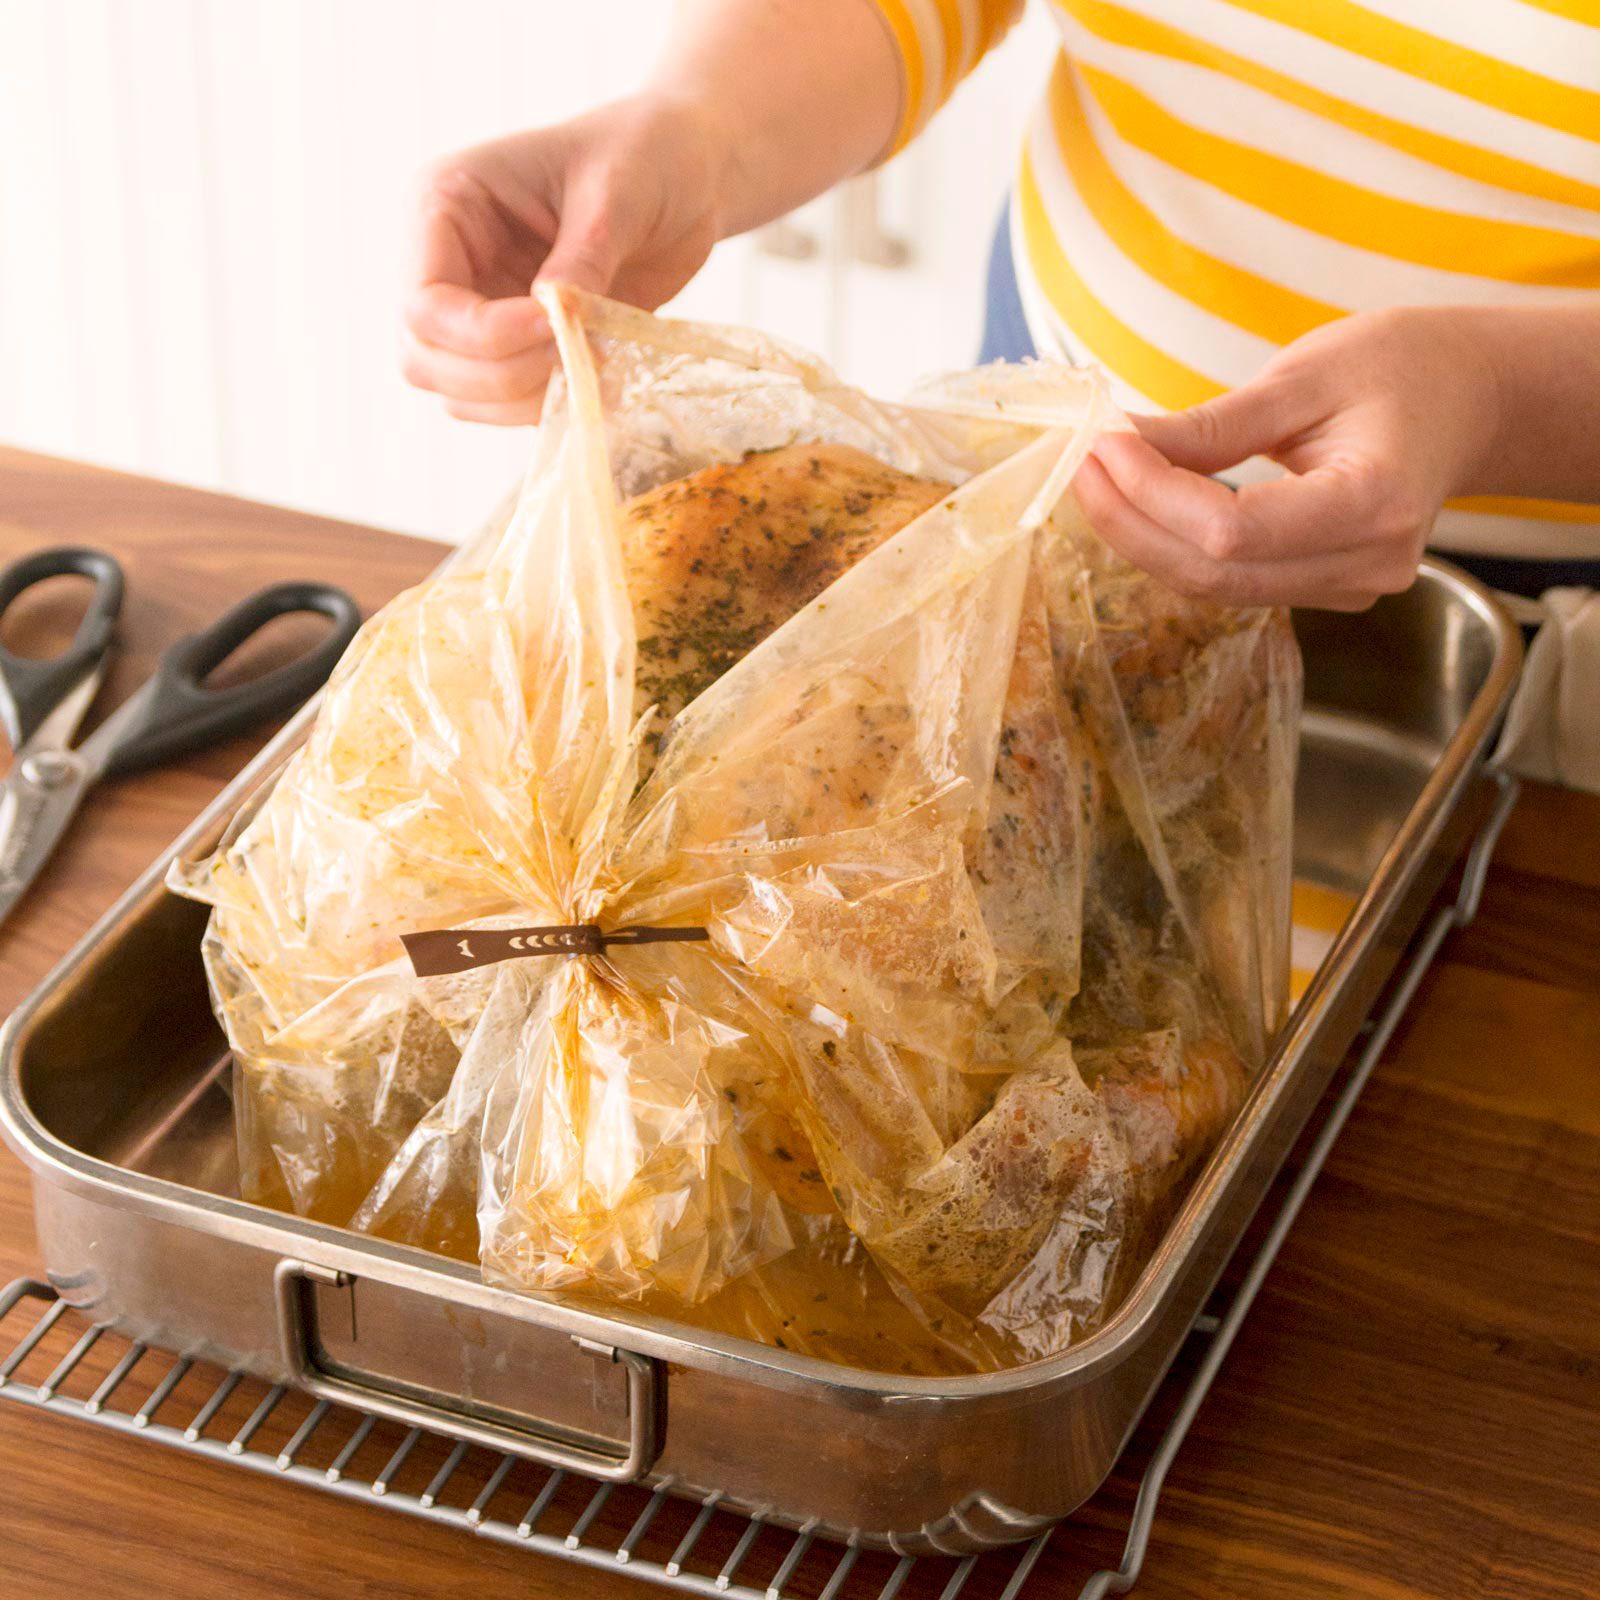 Cooking a Turkey in an Oven Bag: A Guide